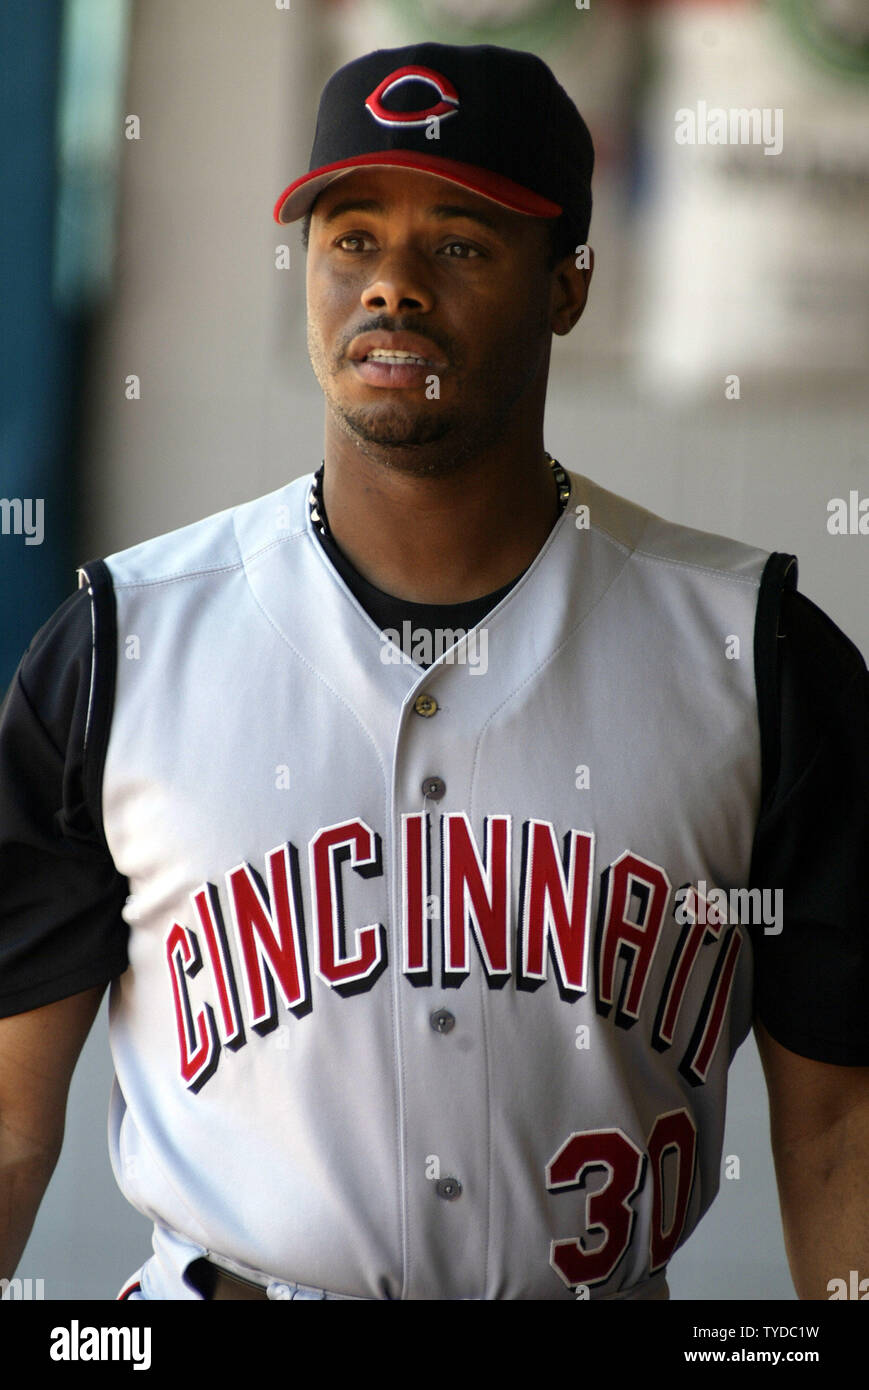 Cincinnati Reds Ken Griffey Jr. in dugout during game against the Florida  Marlins, at Pro Player Stadium, in Miami, Florida, on June 2, 2004. The  Reds won 3-1 over the Marlins. (UPI